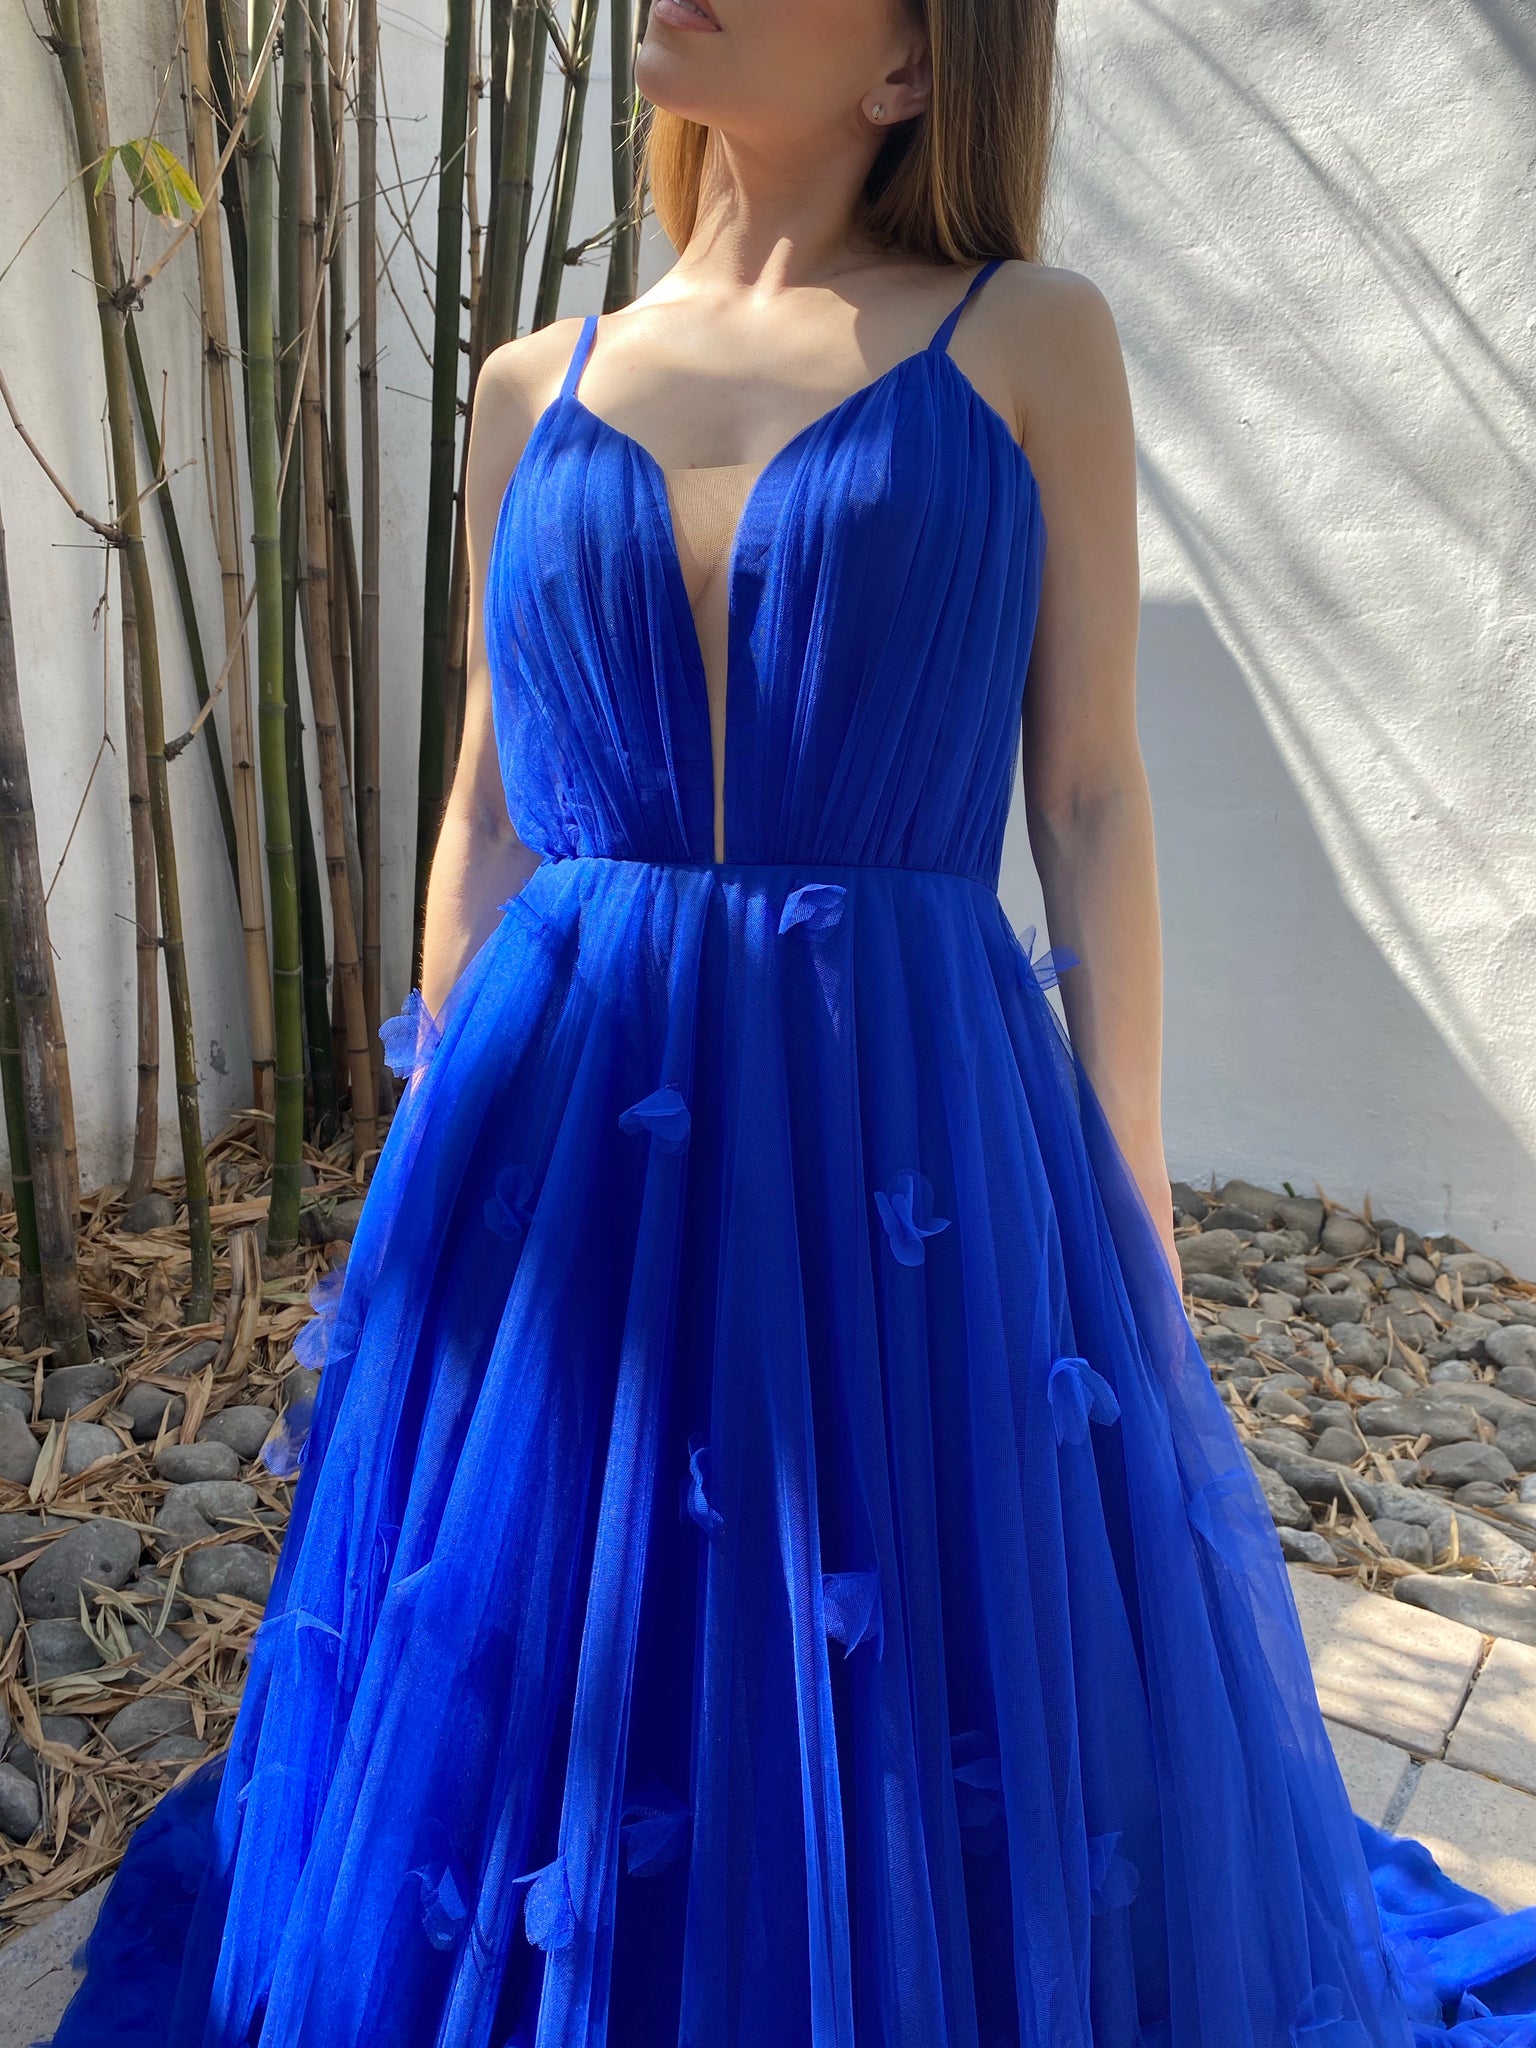 Blue floral tulle gown